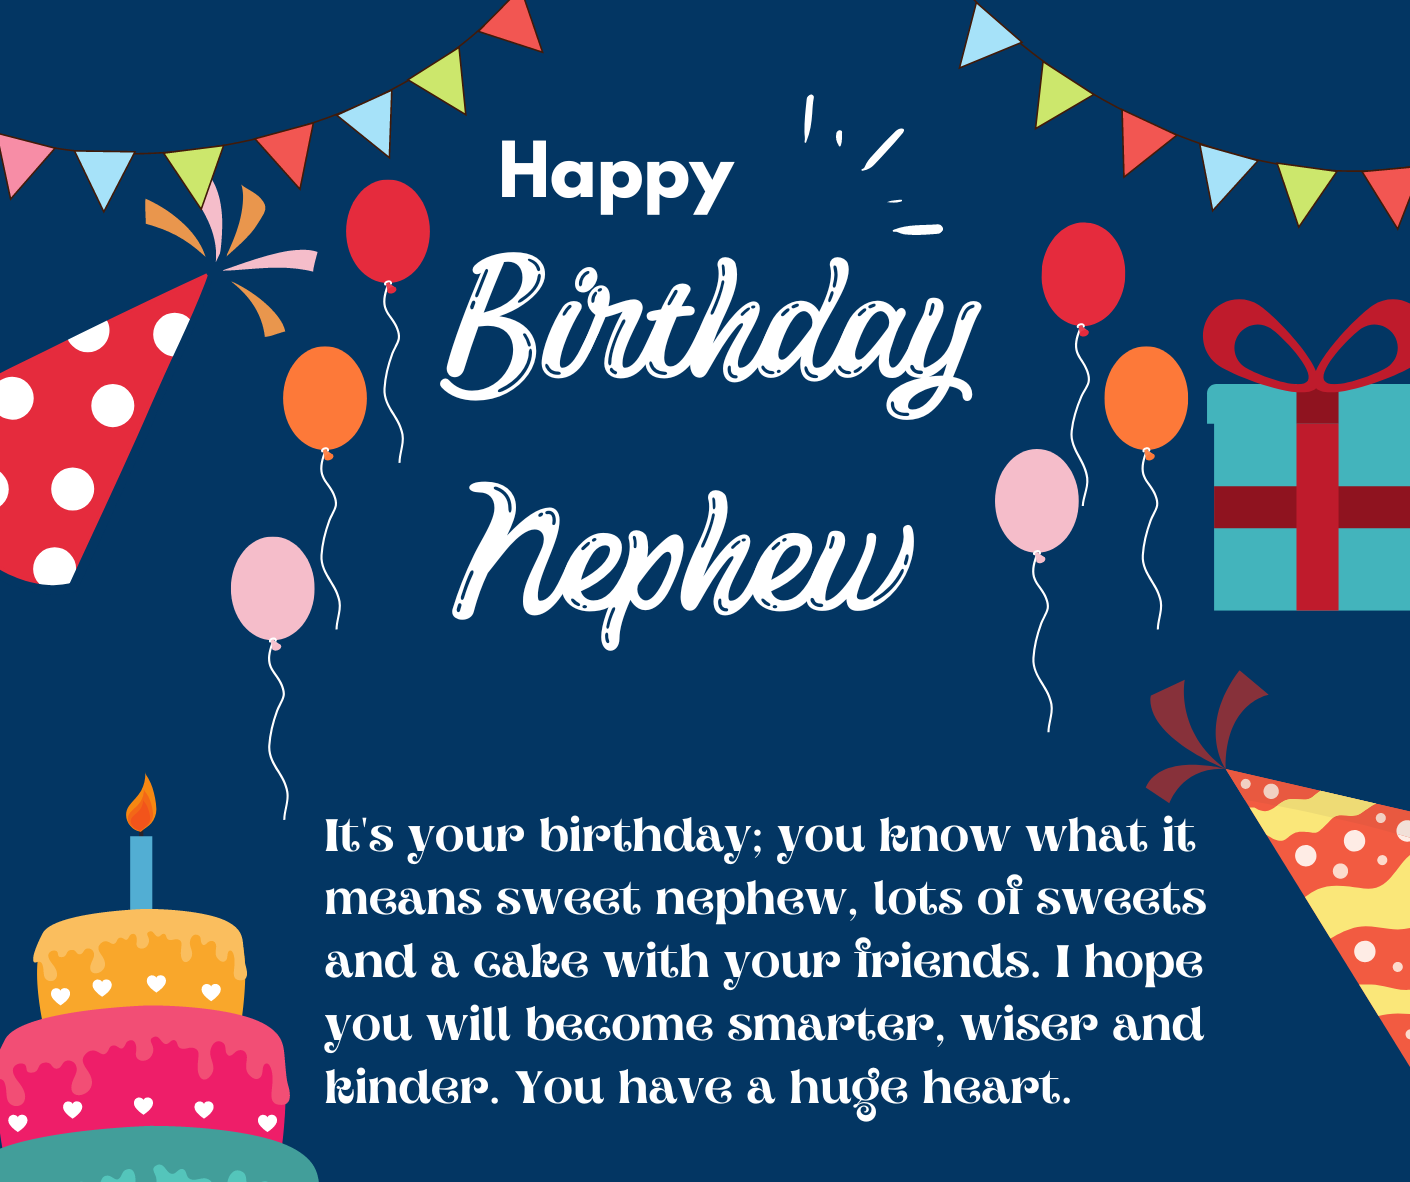 Cute birthday image for your nephew